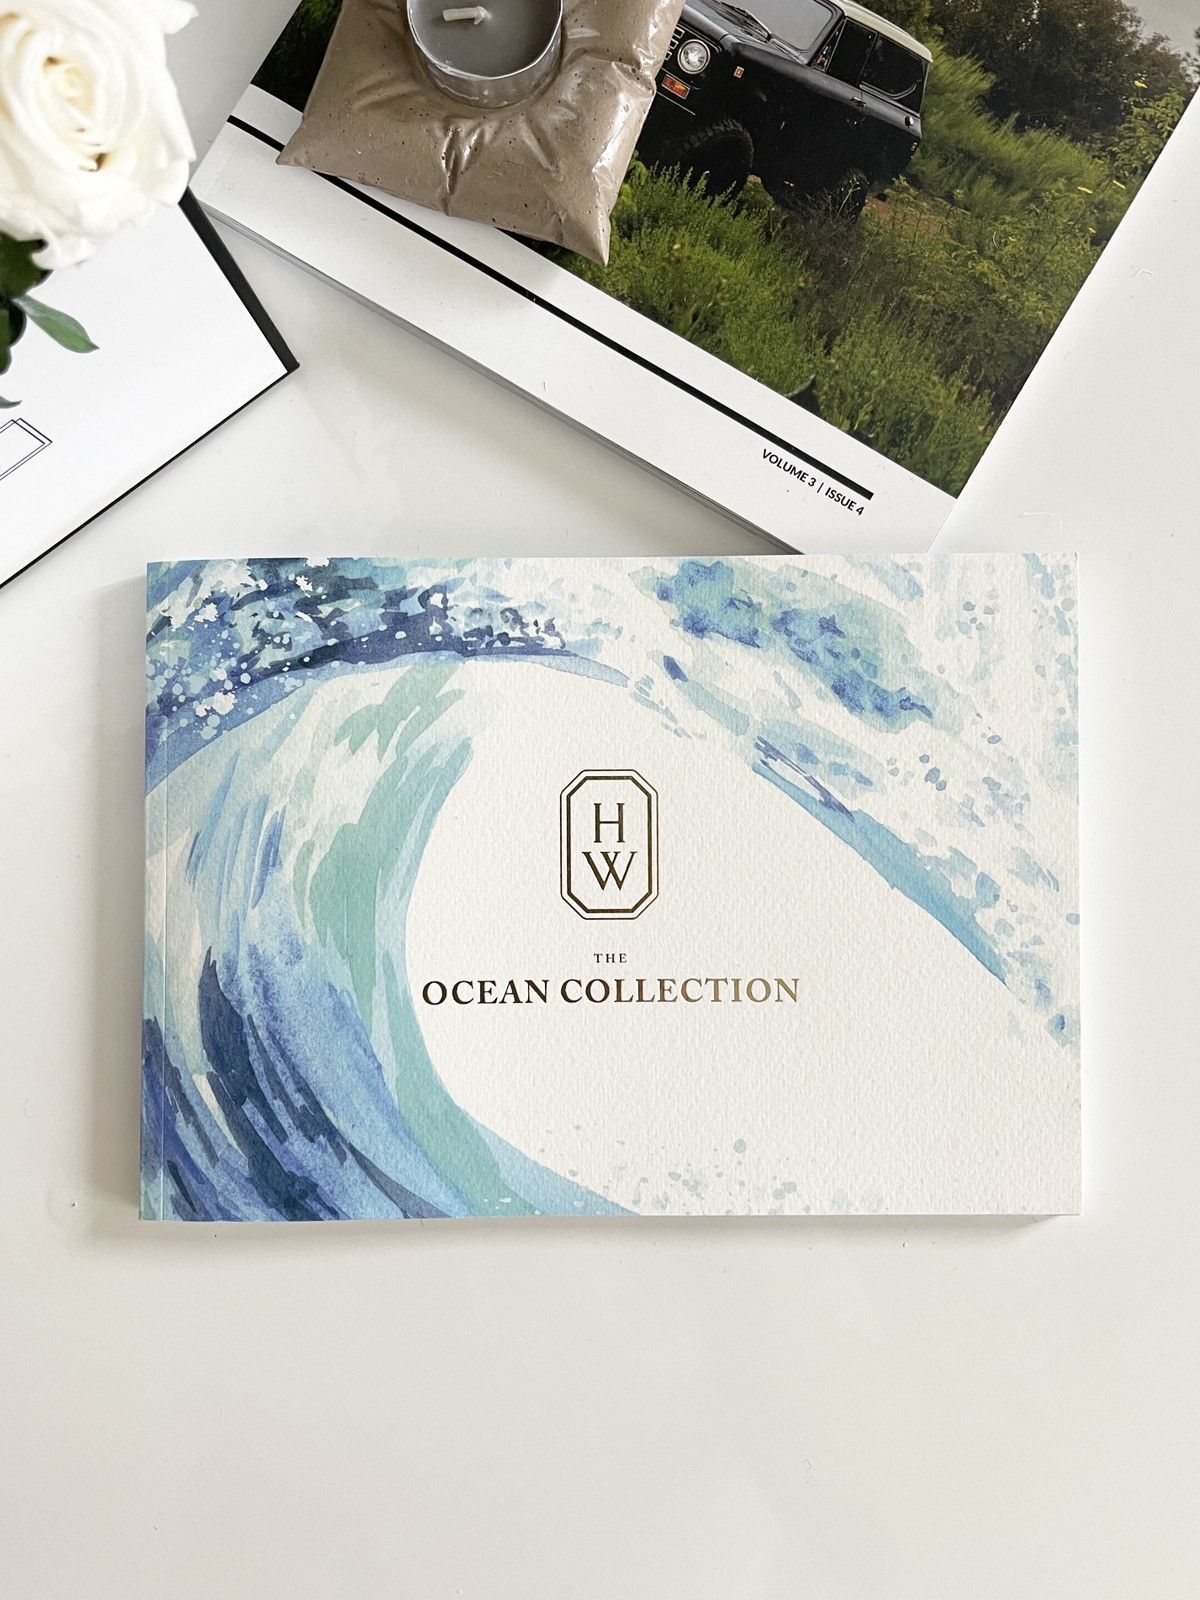 Jewelry - Harry Winston VIP Exclusive Ocean Collection Watch Catalog - 1